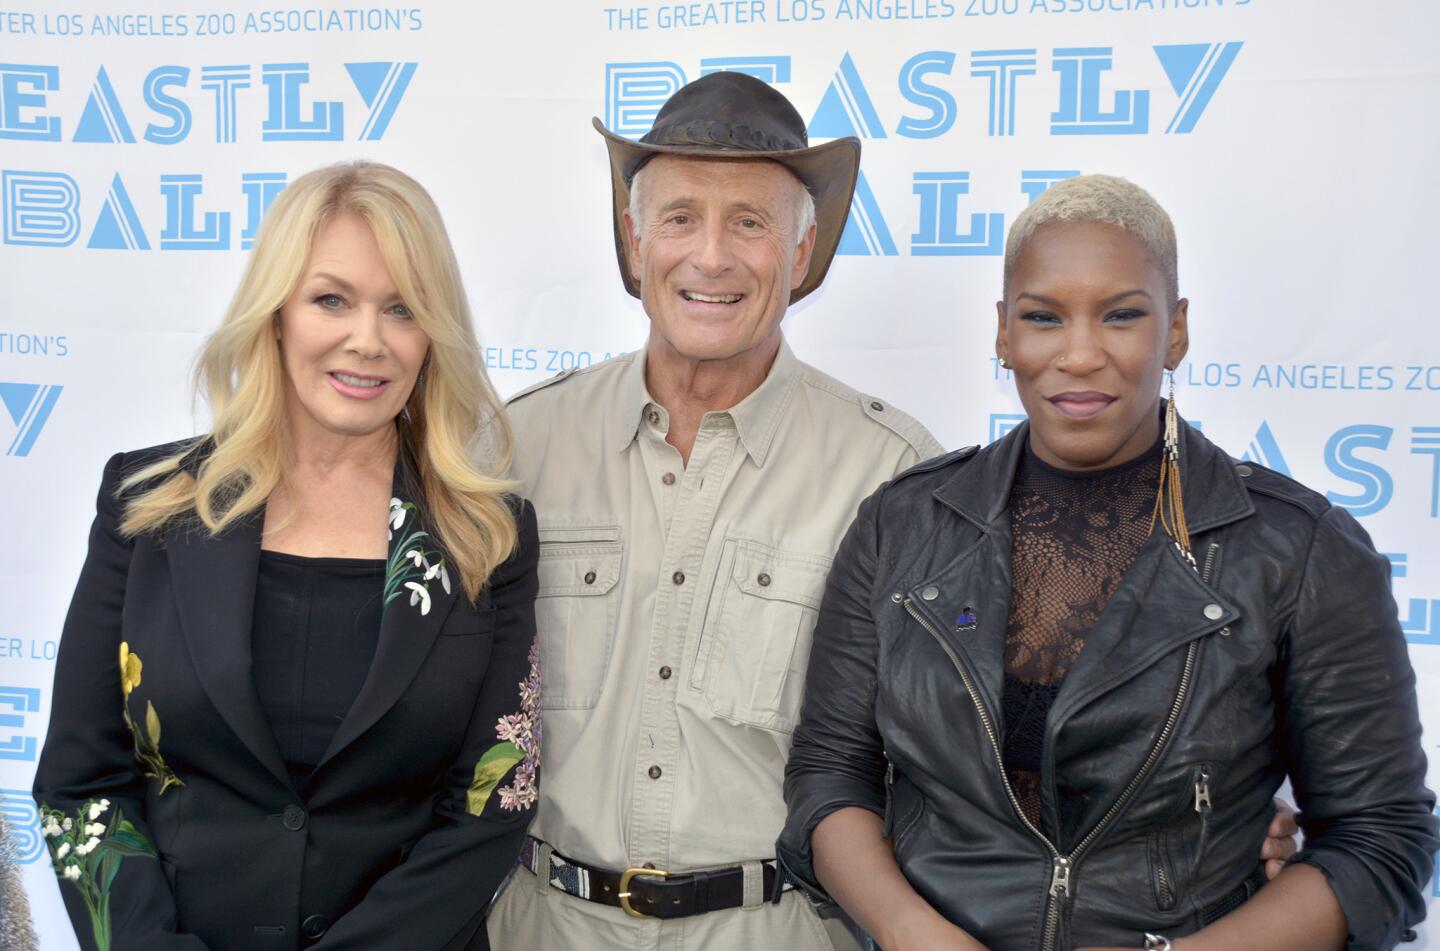 Beastly Ball honoree Jack Hanna with two of the evening's headliners, Nancy Wilson, left, and Liv Warfield.